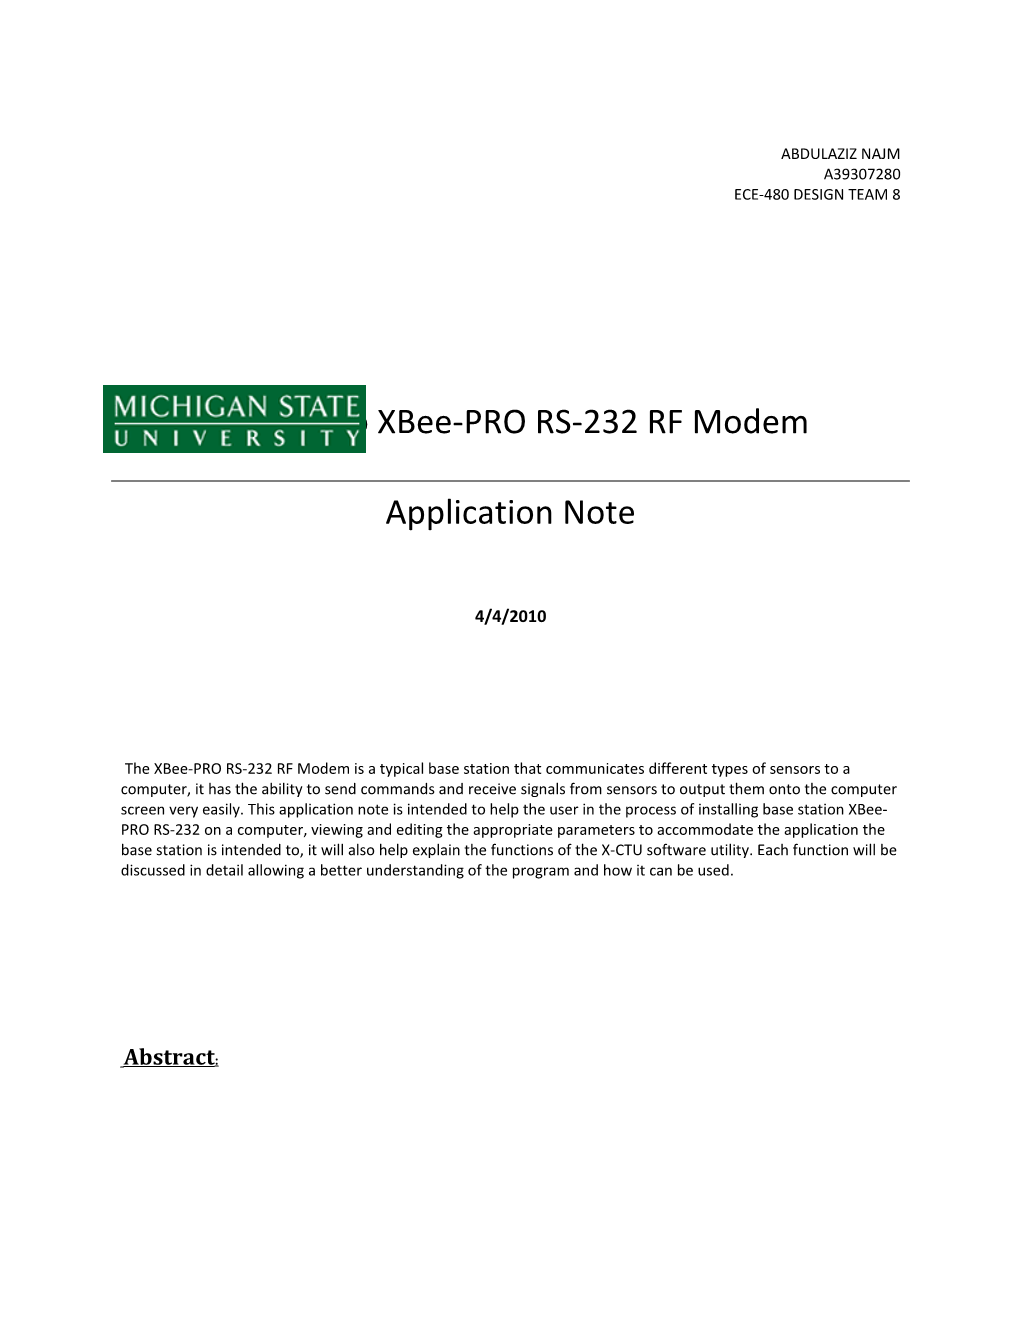 A Guide to Xbee-PRO RS-232 RF Modem